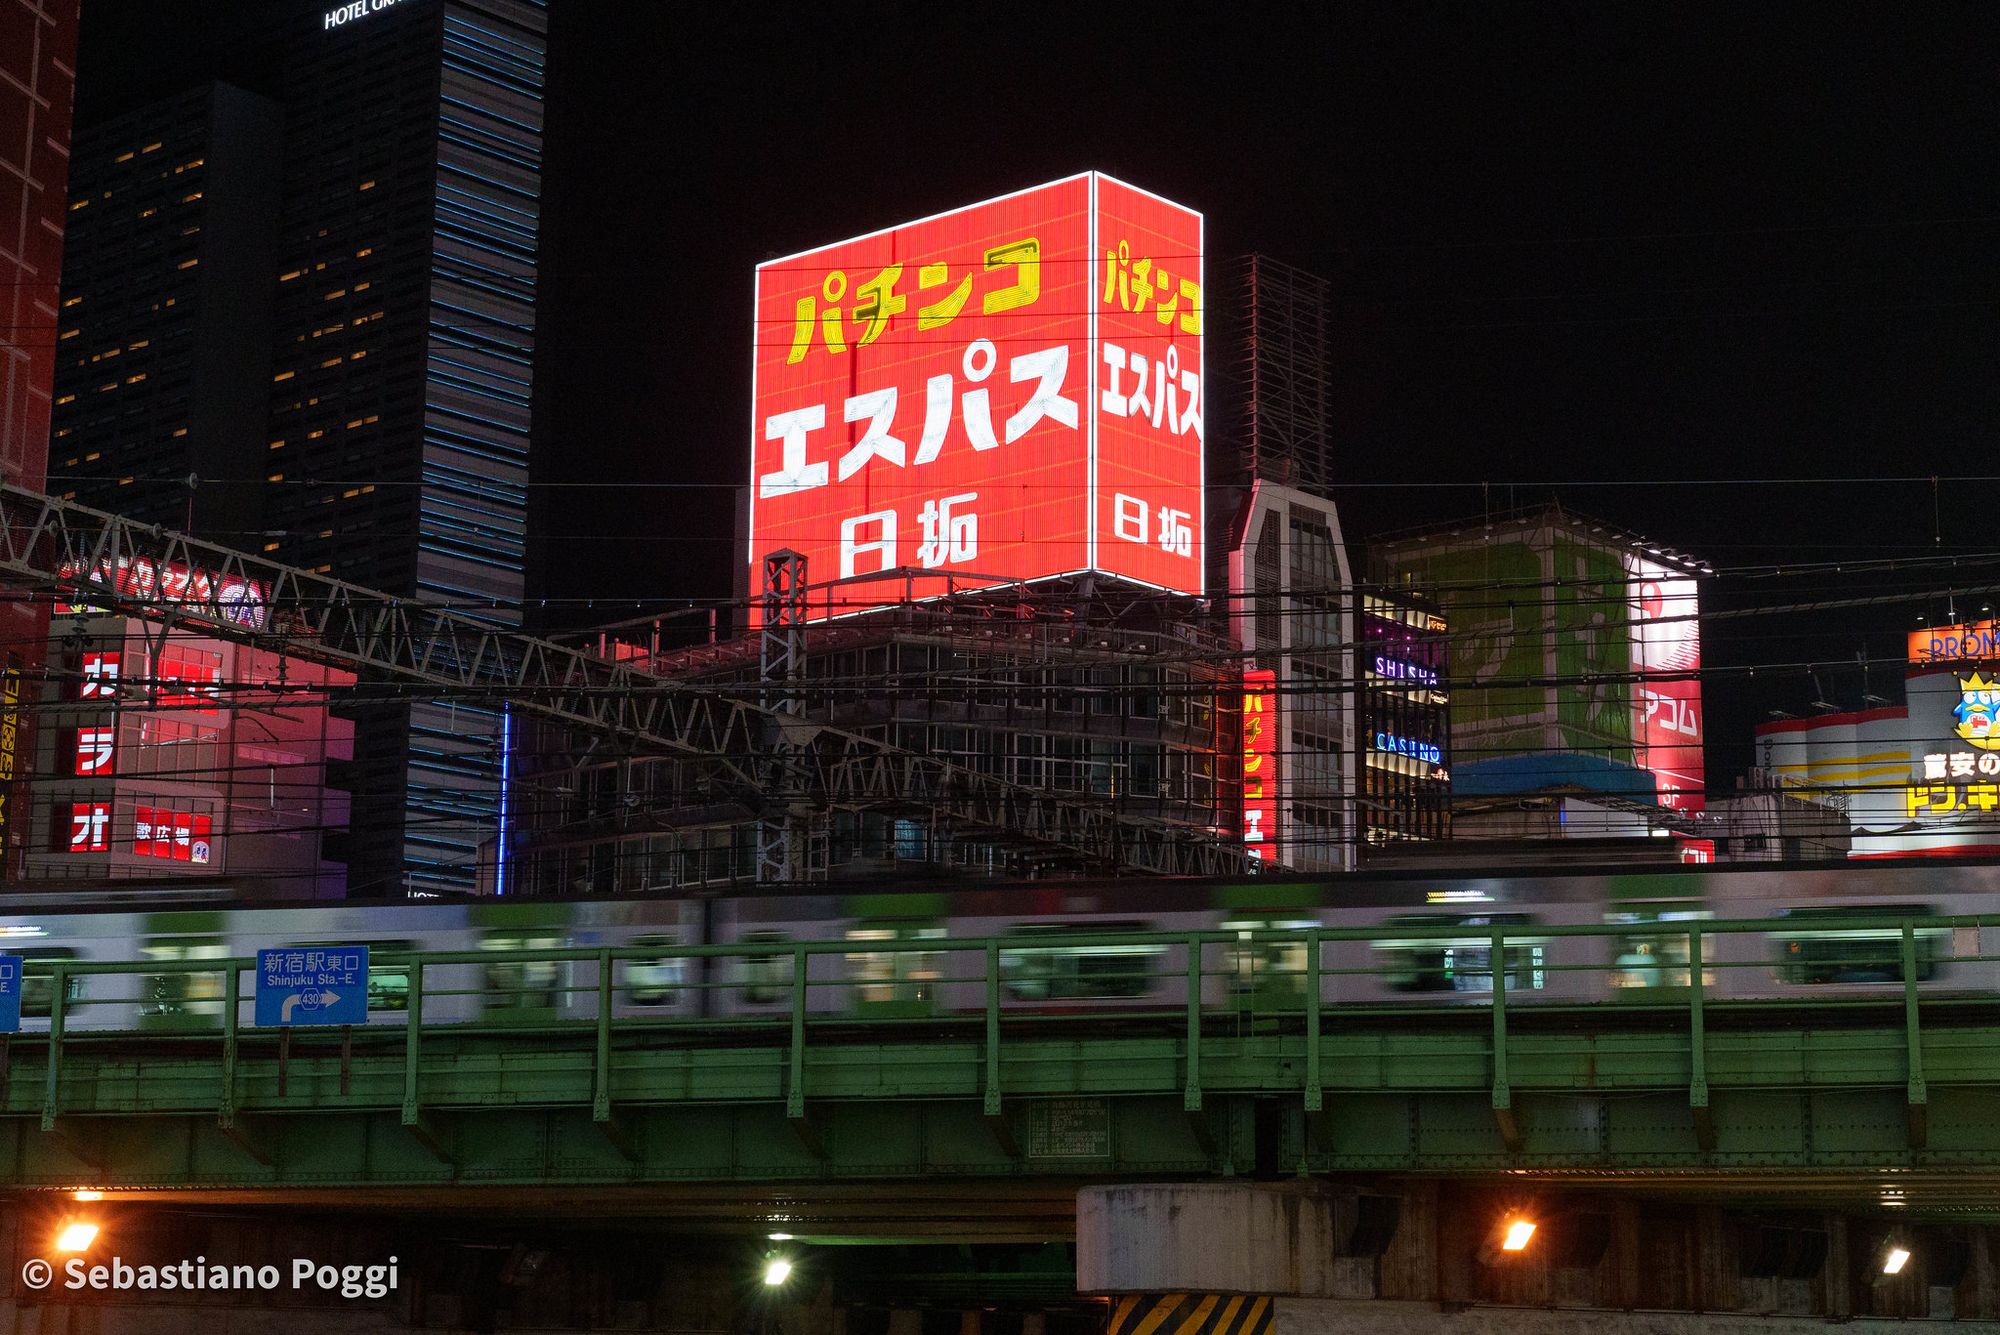 Picture of a Yamanote Line train zooming by on the Shinjuku rail bridge at night, with Kabukicho in the background